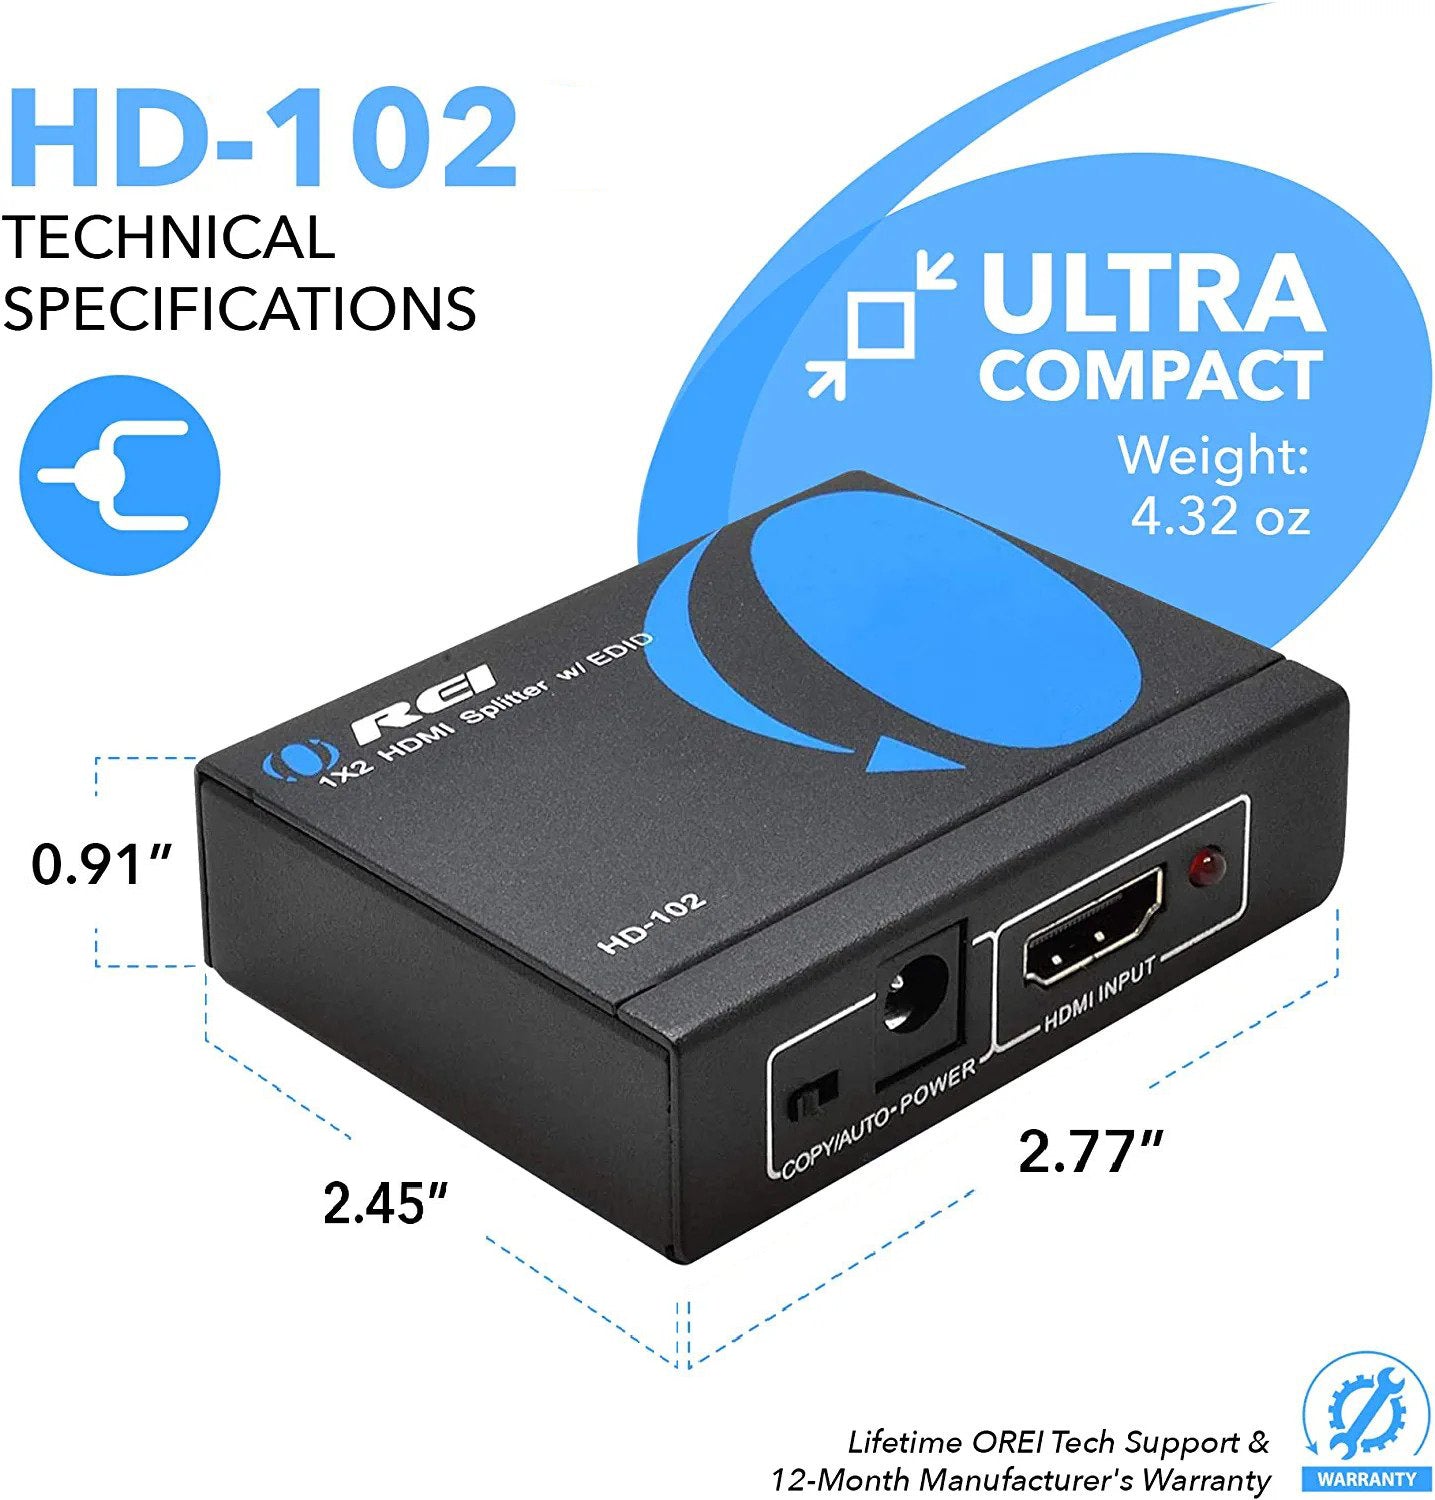  HDMI Splitter with HD HDMI Cable, 1 in 2 Out 4K HDMI Splitter  for Full HD 4K@30HZ 1080P 3D Splitter (1 HDMI Source to 2 HDMI Displays) :  Electronics